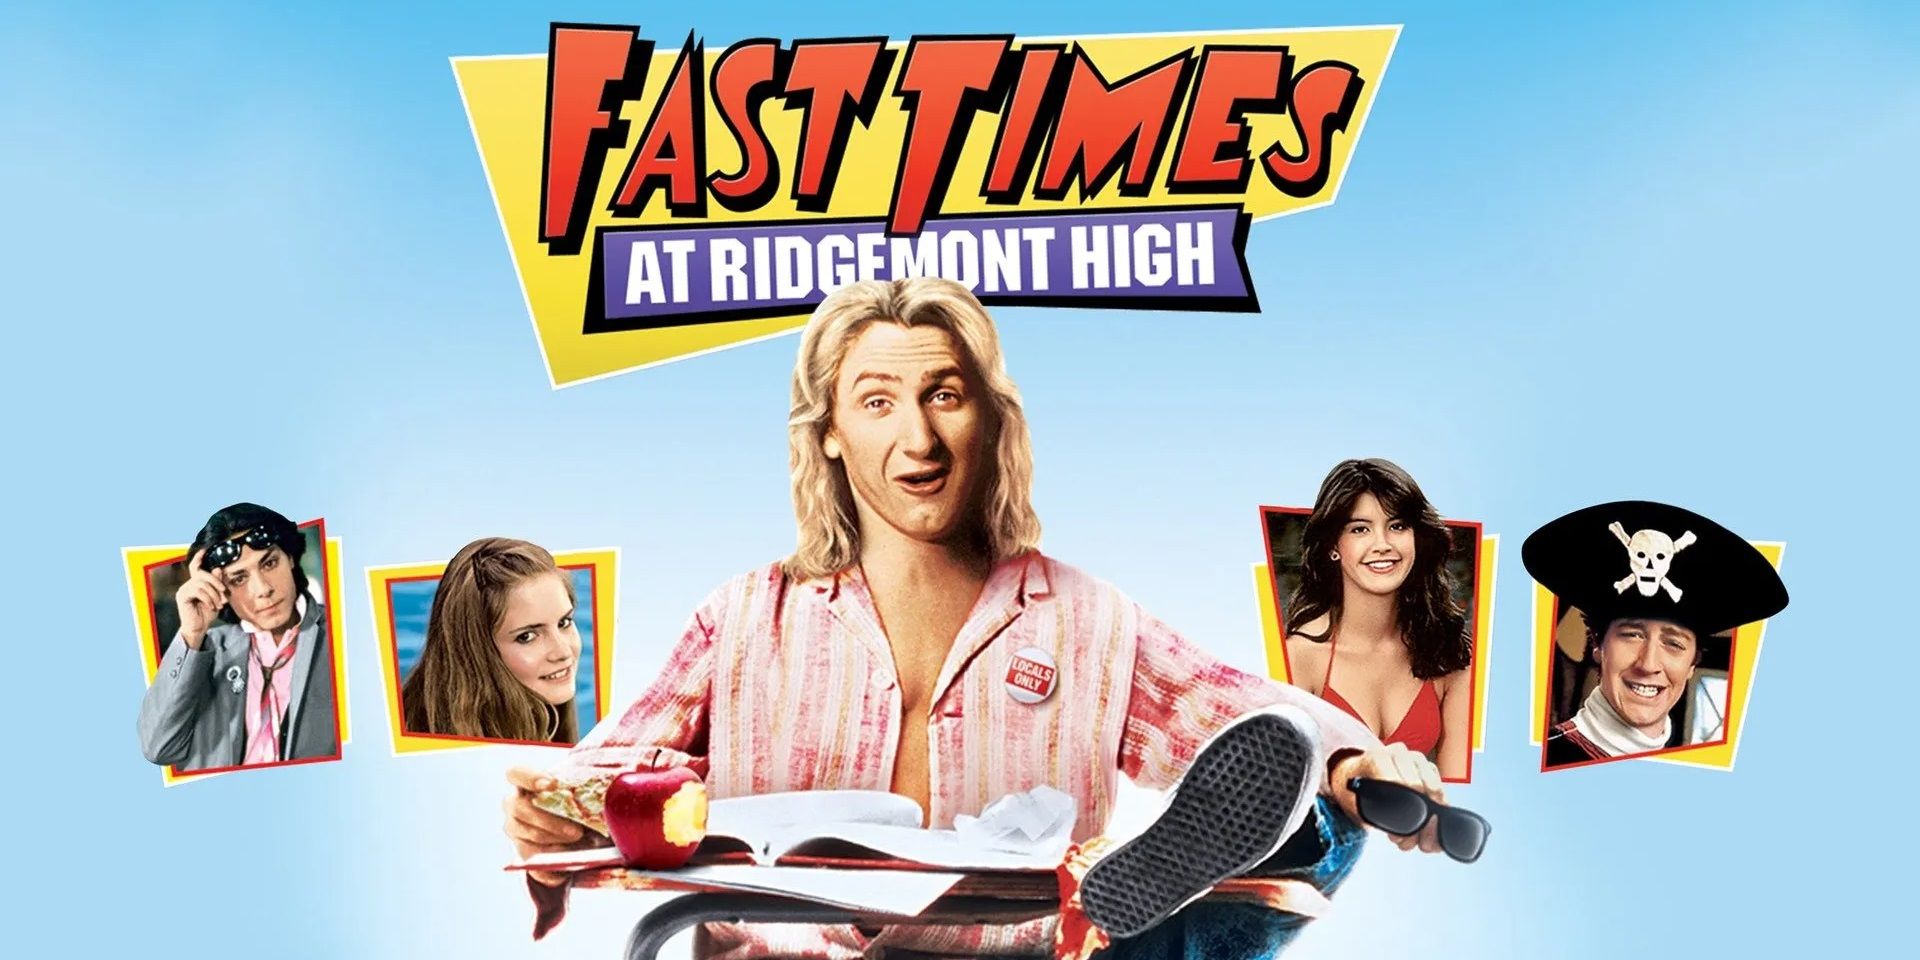 The poster for Fast Times at Ridgemont High